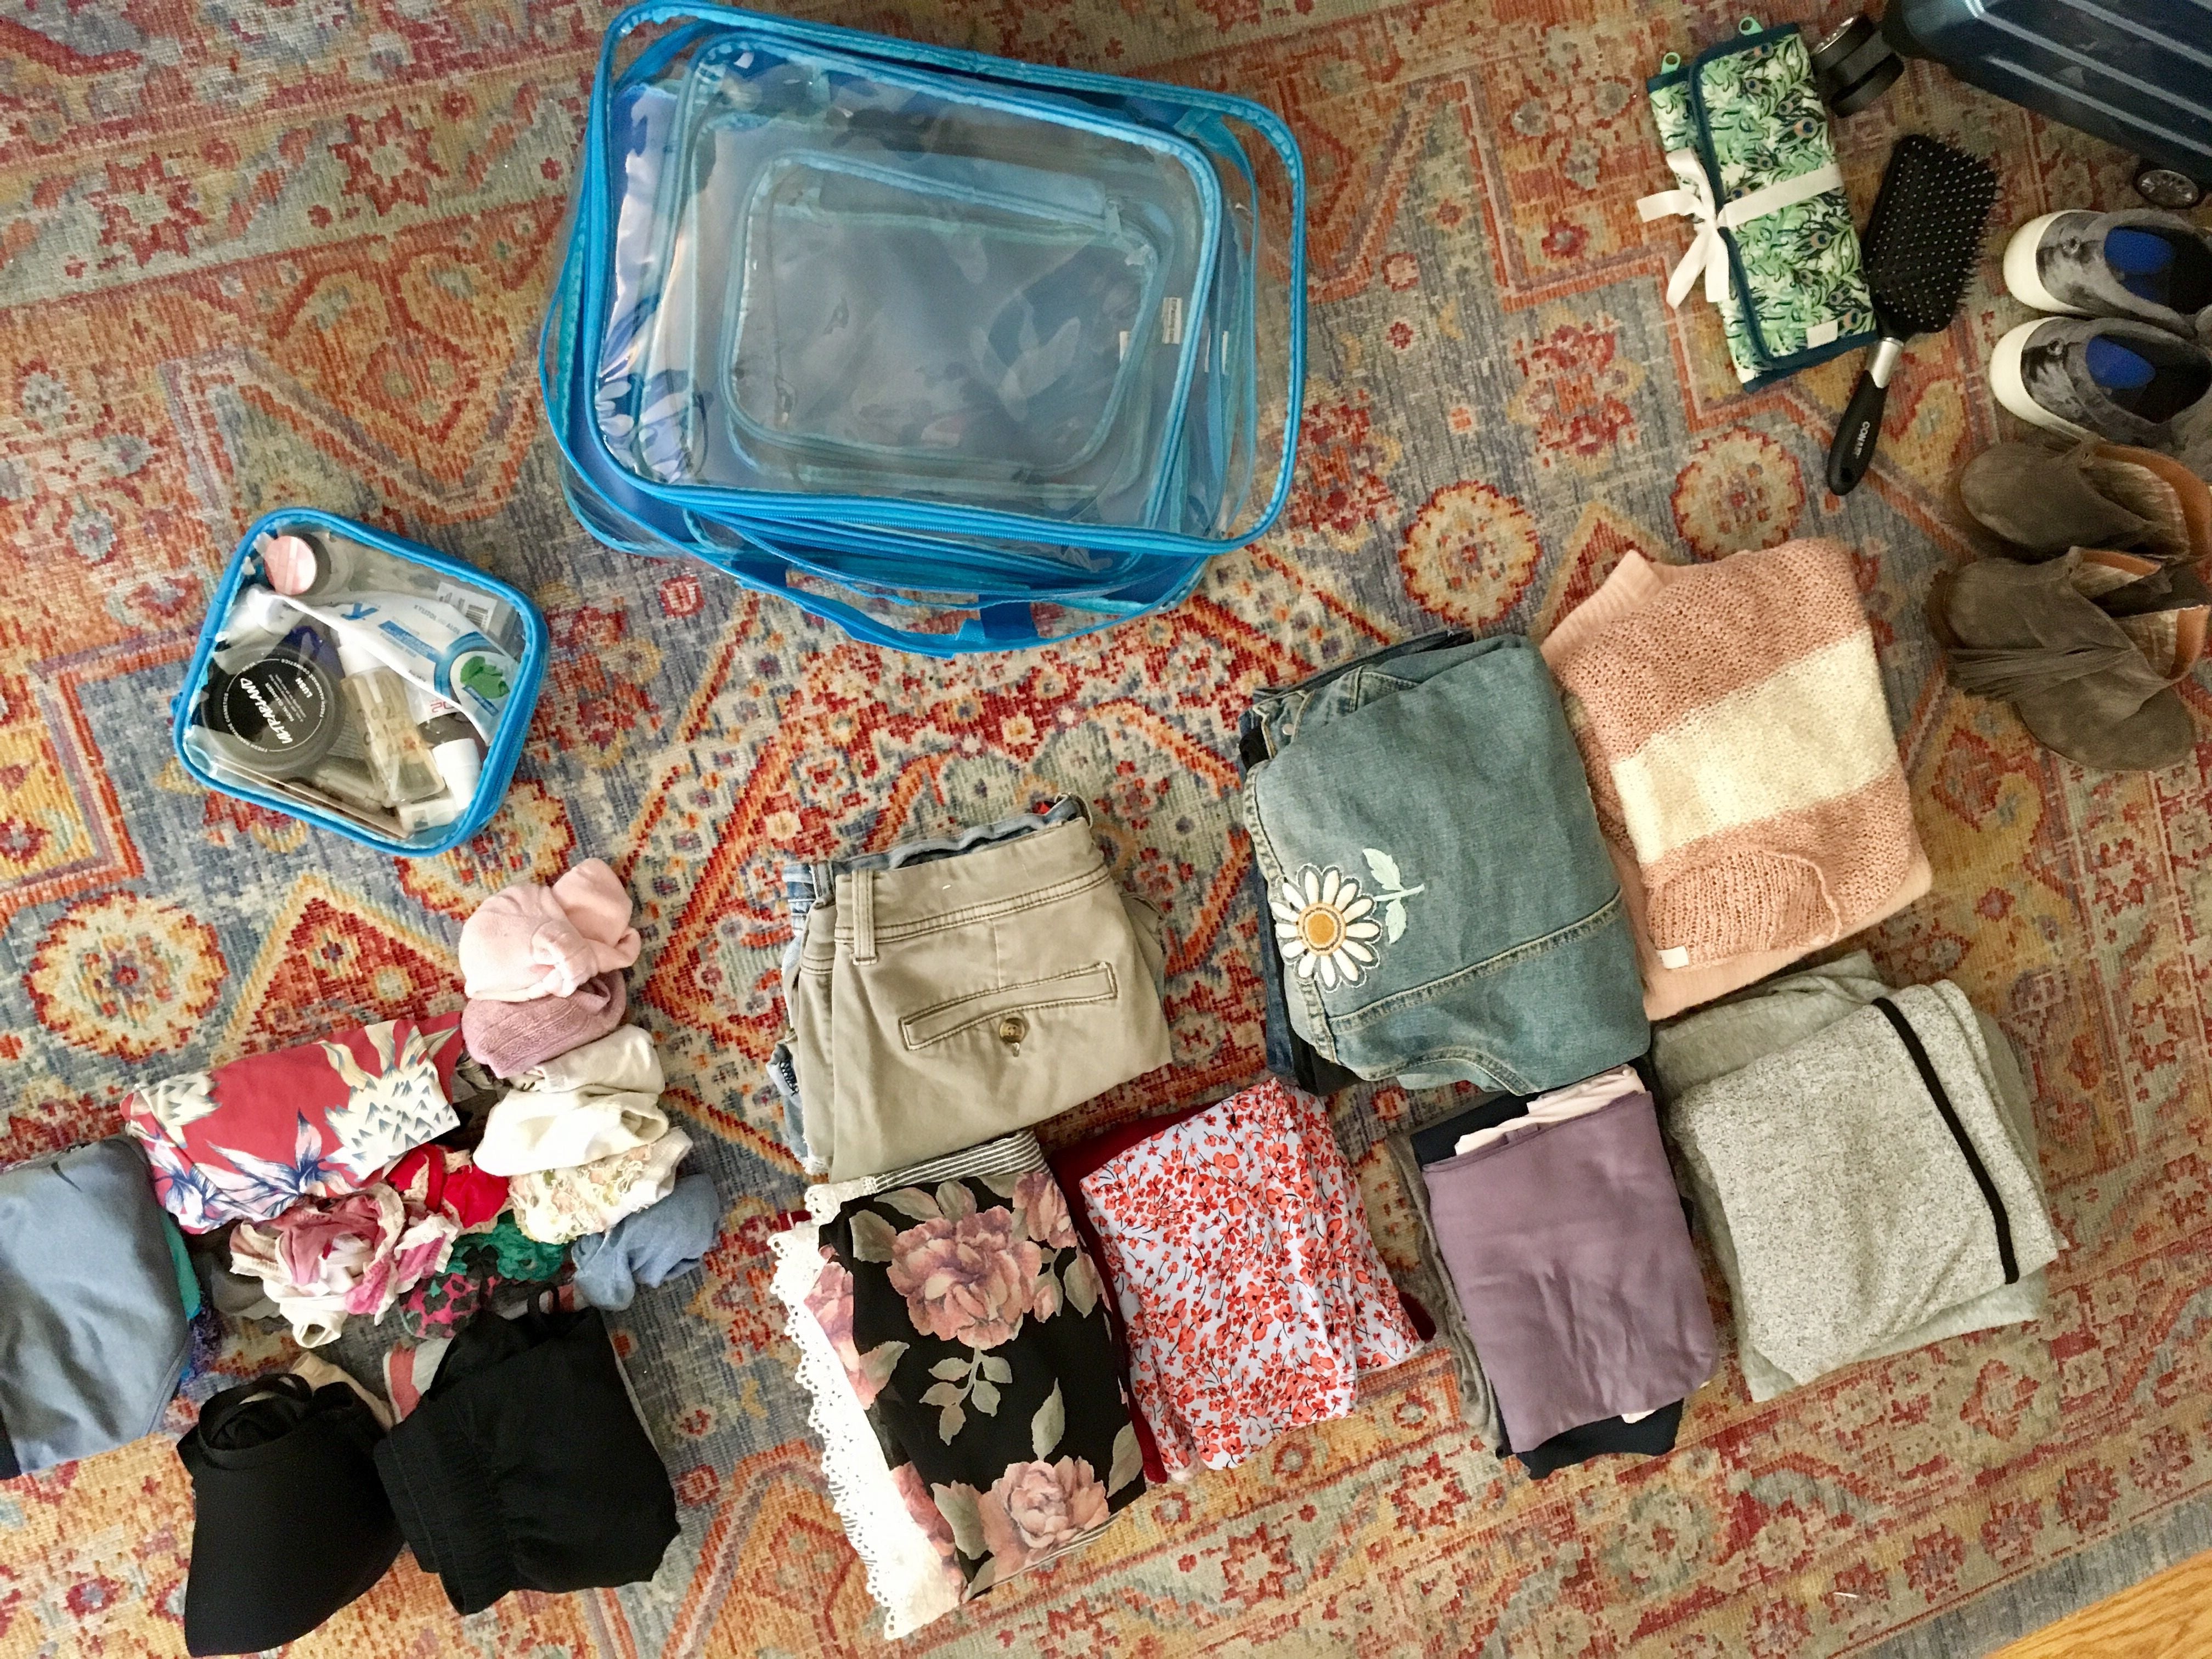 Packing folded and laid out clothes for a three-day trip